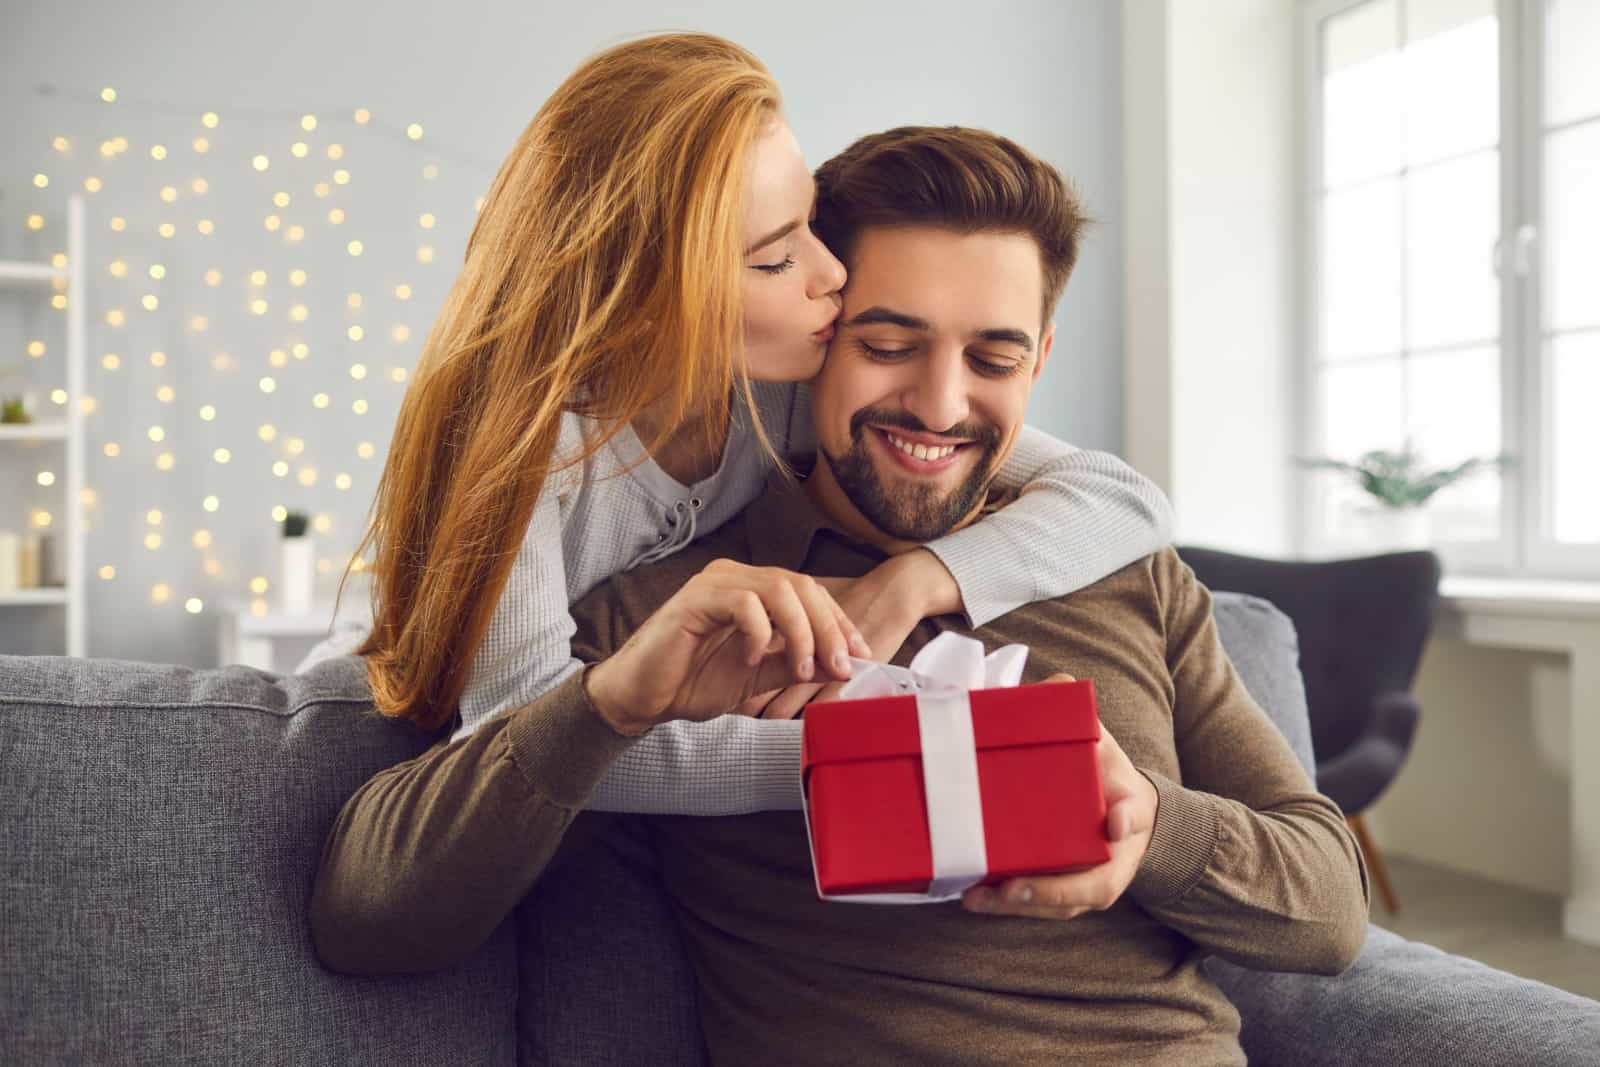 woman gives present to boyfriend on his birthday